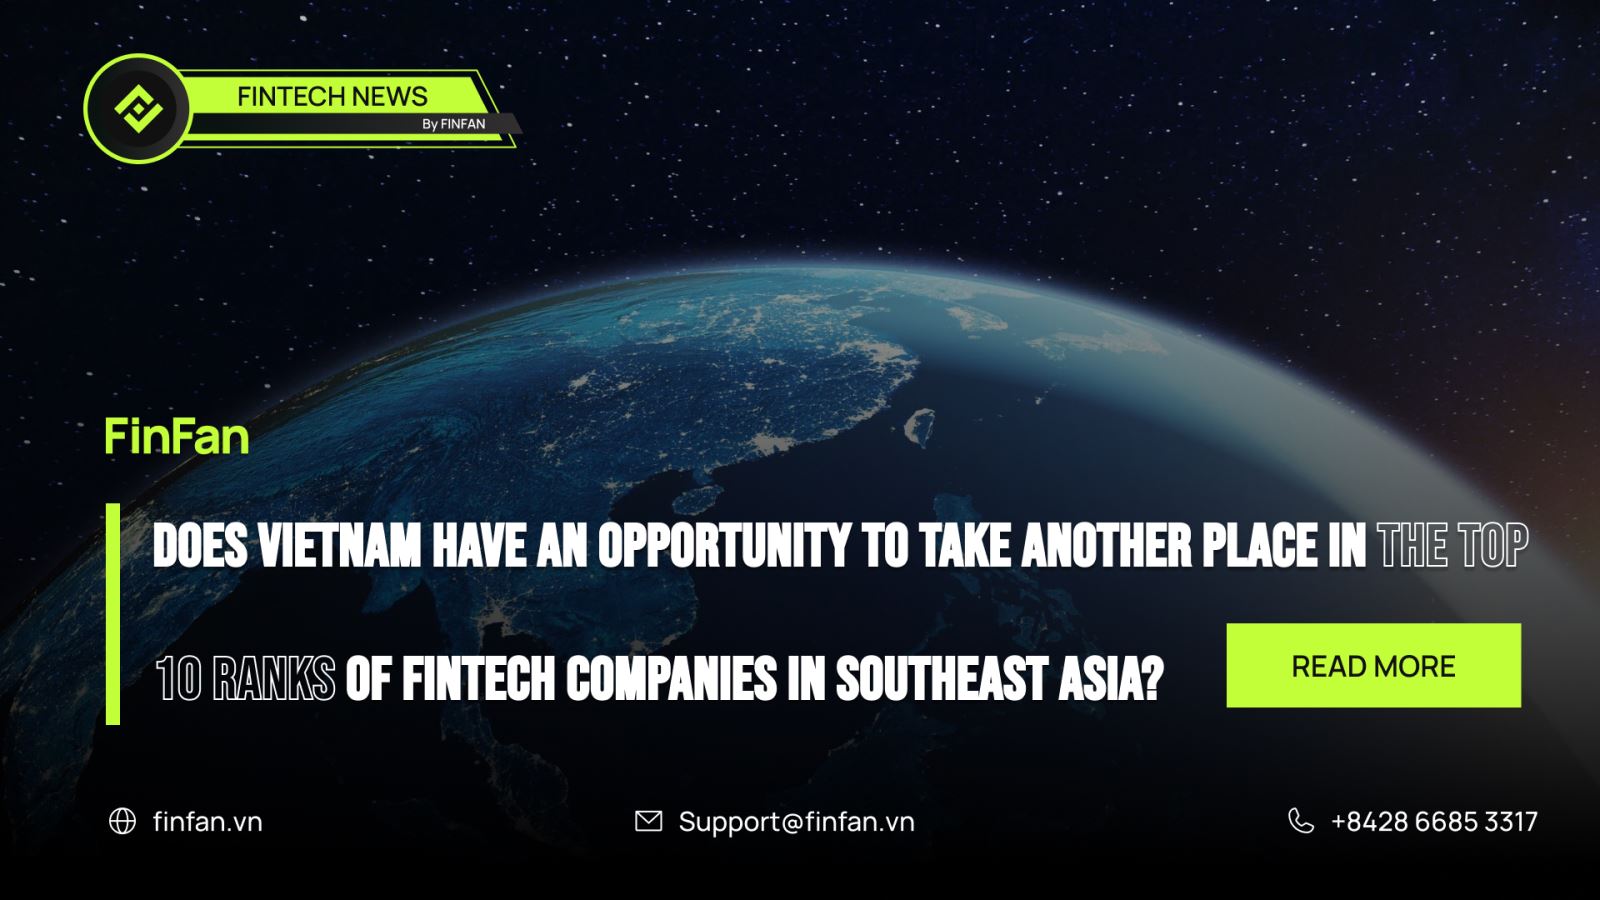 Top fintech companies in Southeast Asia - Does Vietnam have an opportunity to take another place in the top 10 ranks?